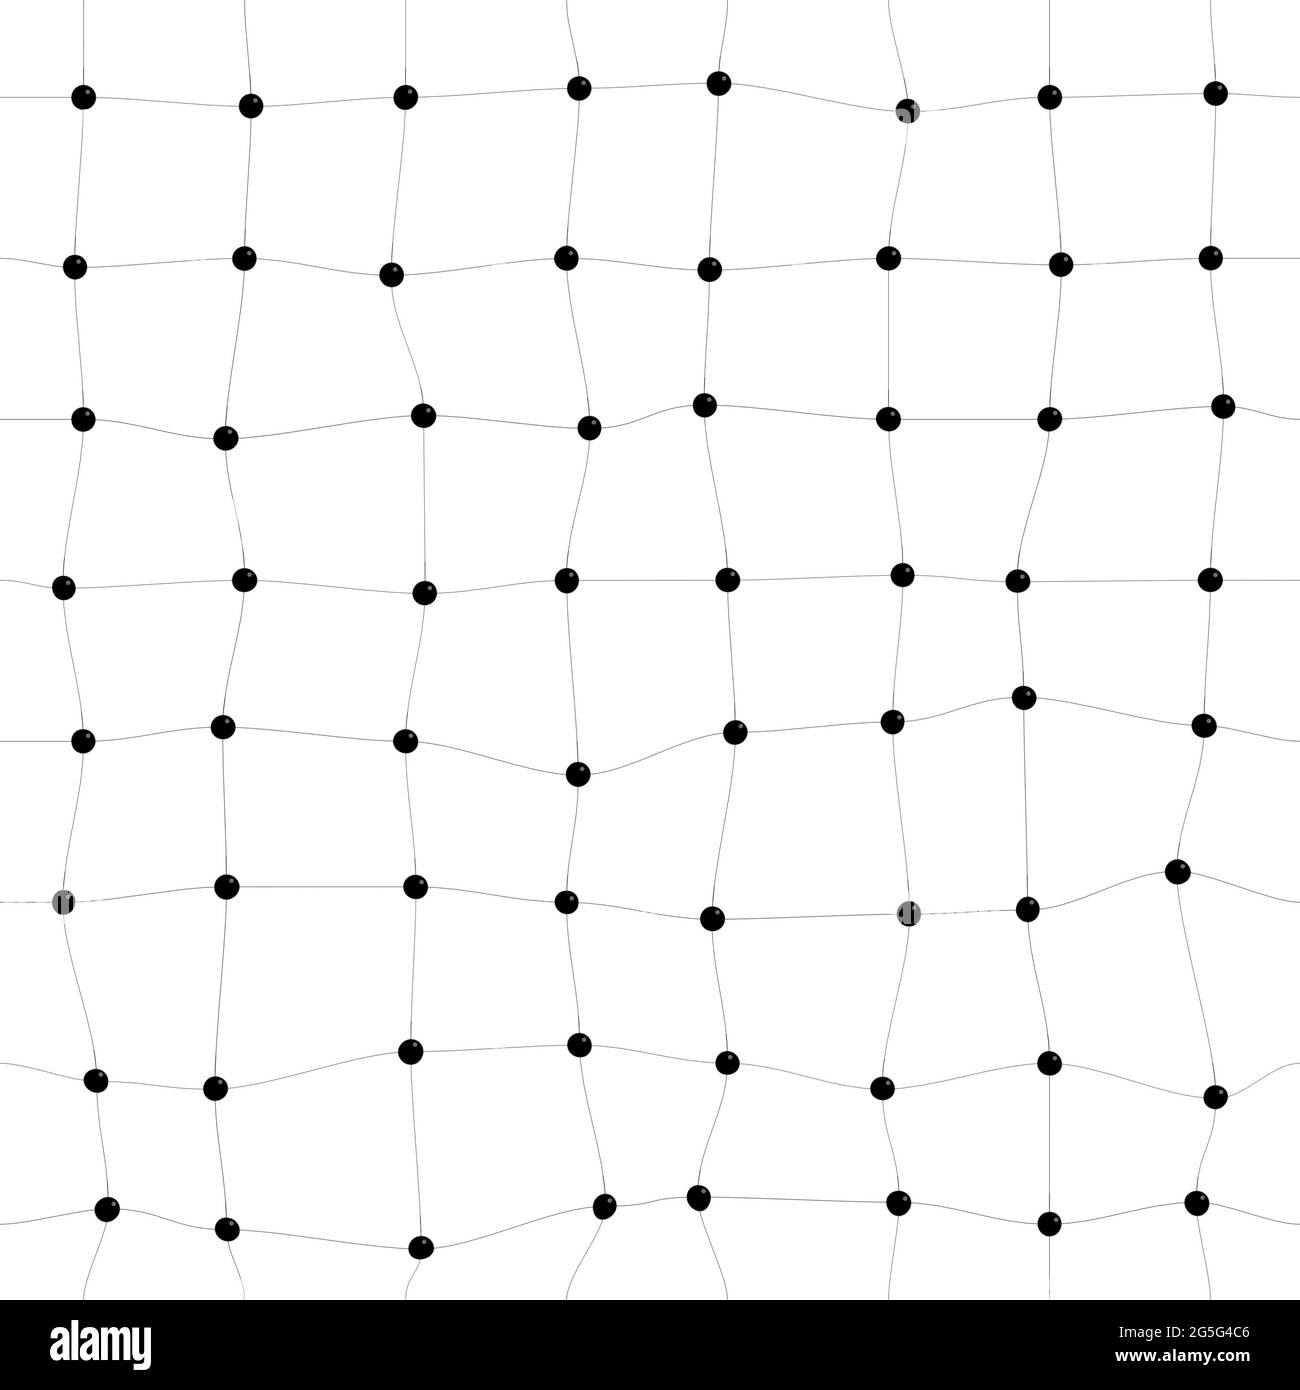 Square, twisted pattern or grid of black dots and lines on white. Abstract connection, chemistry, data and molecule background, seamless pattern. Stock Photo